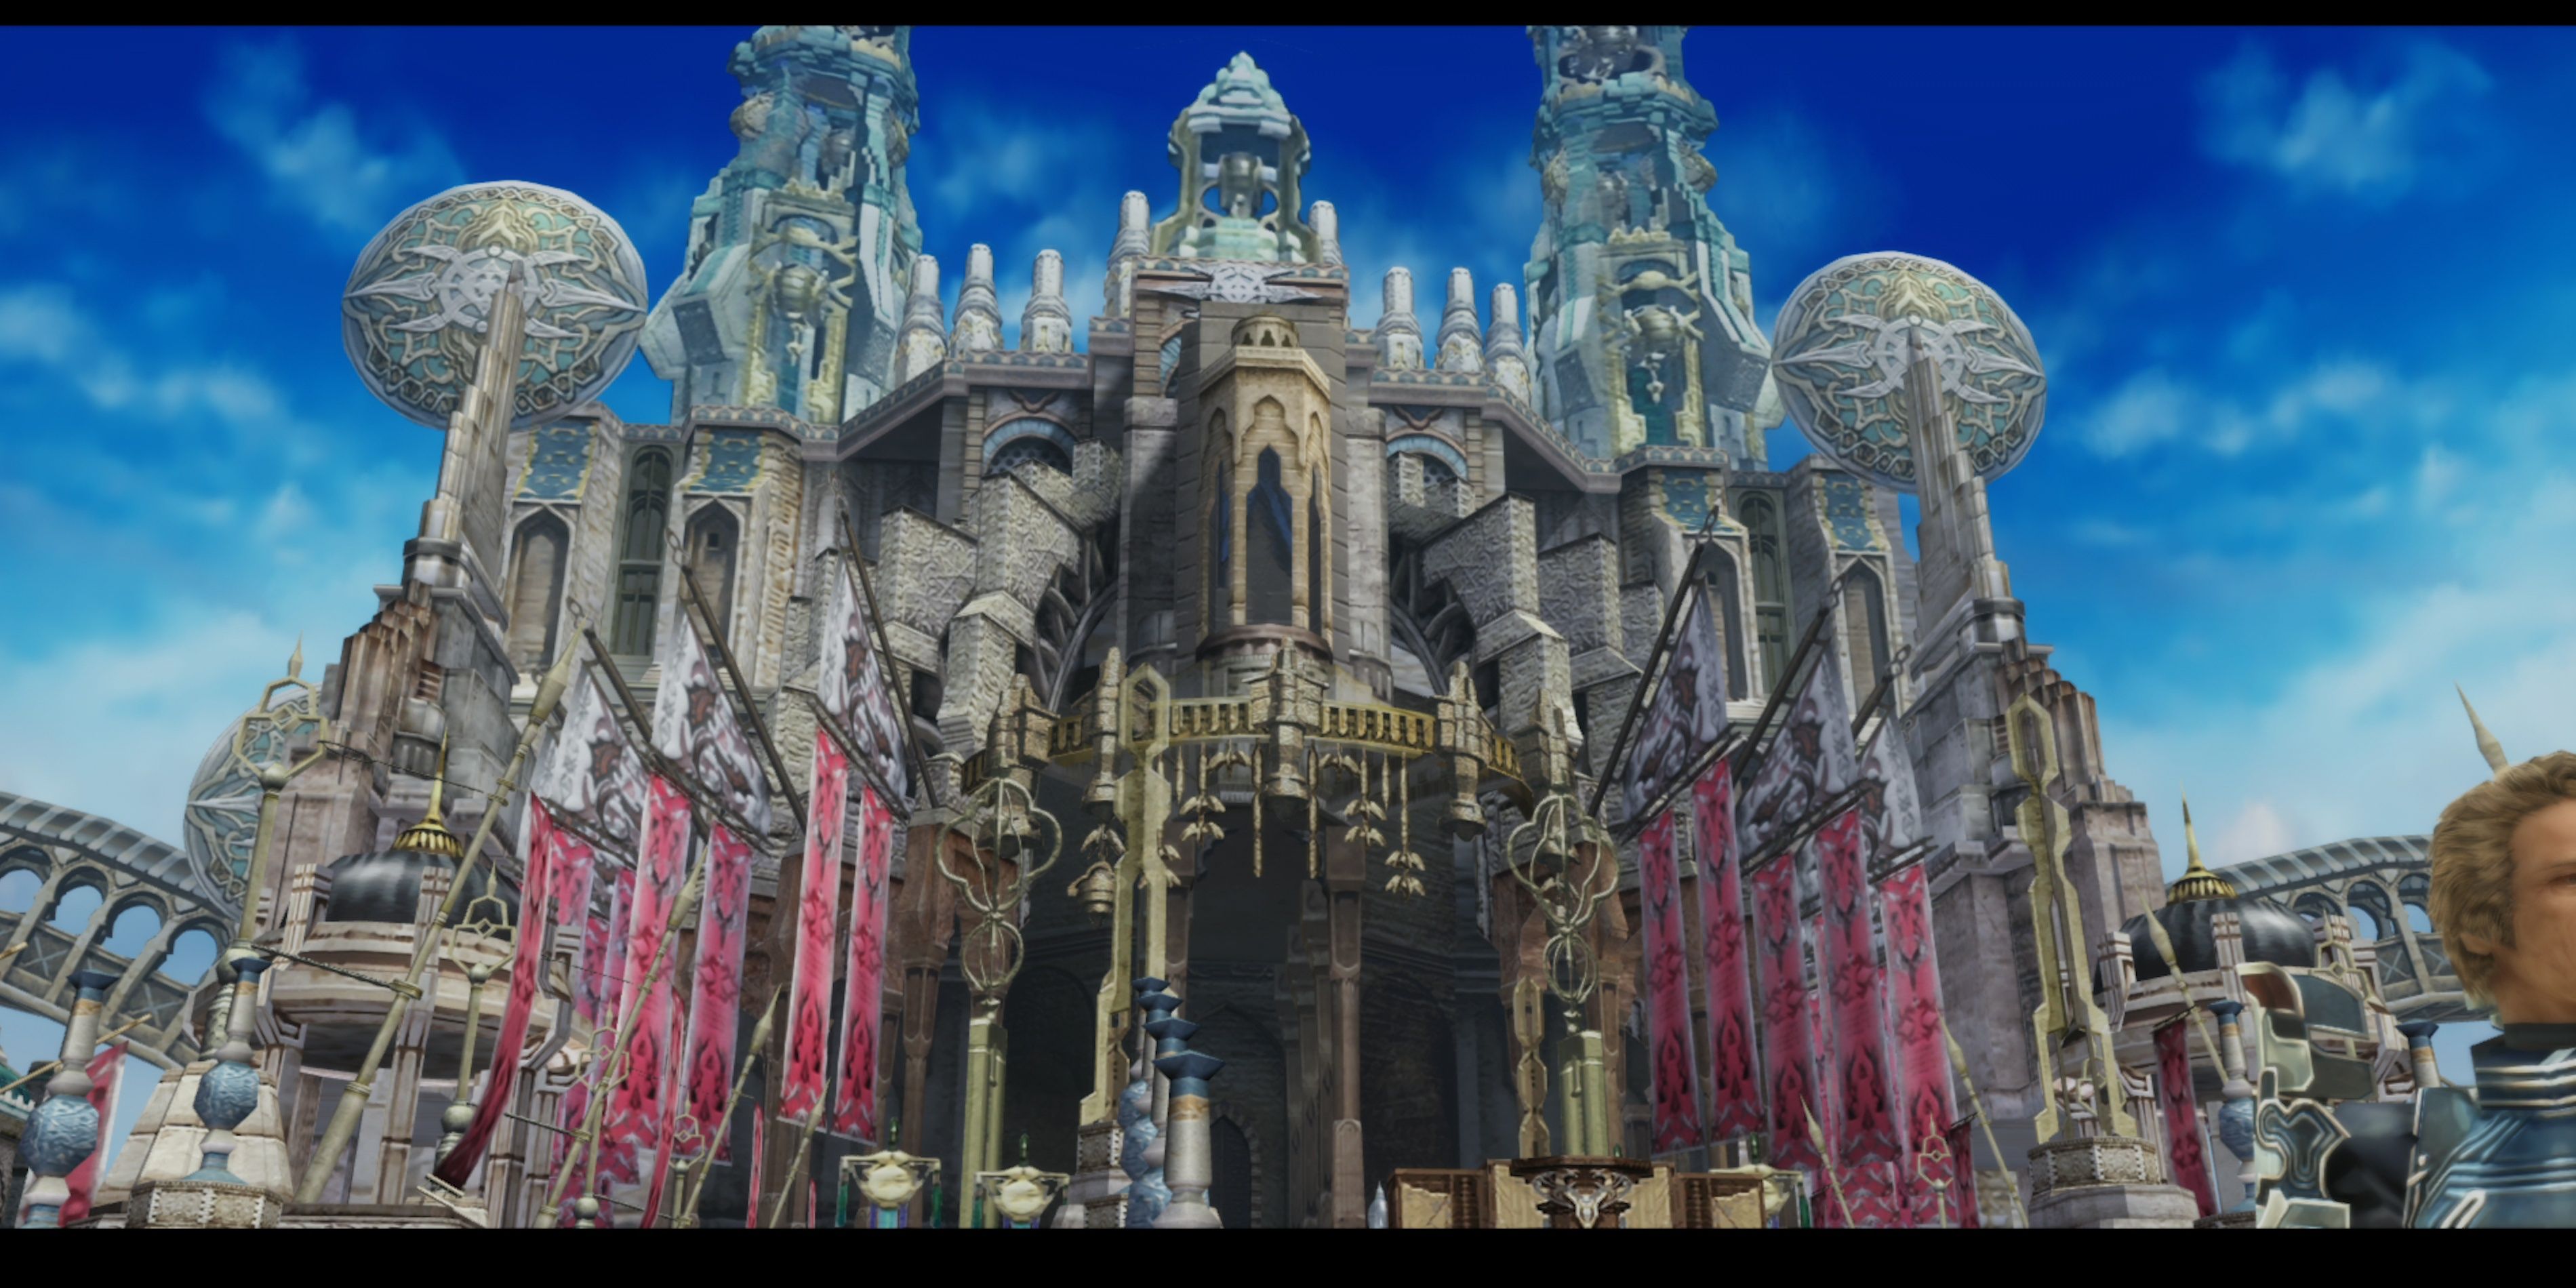 An image of Final Fantasy 12 depicting a giant palace